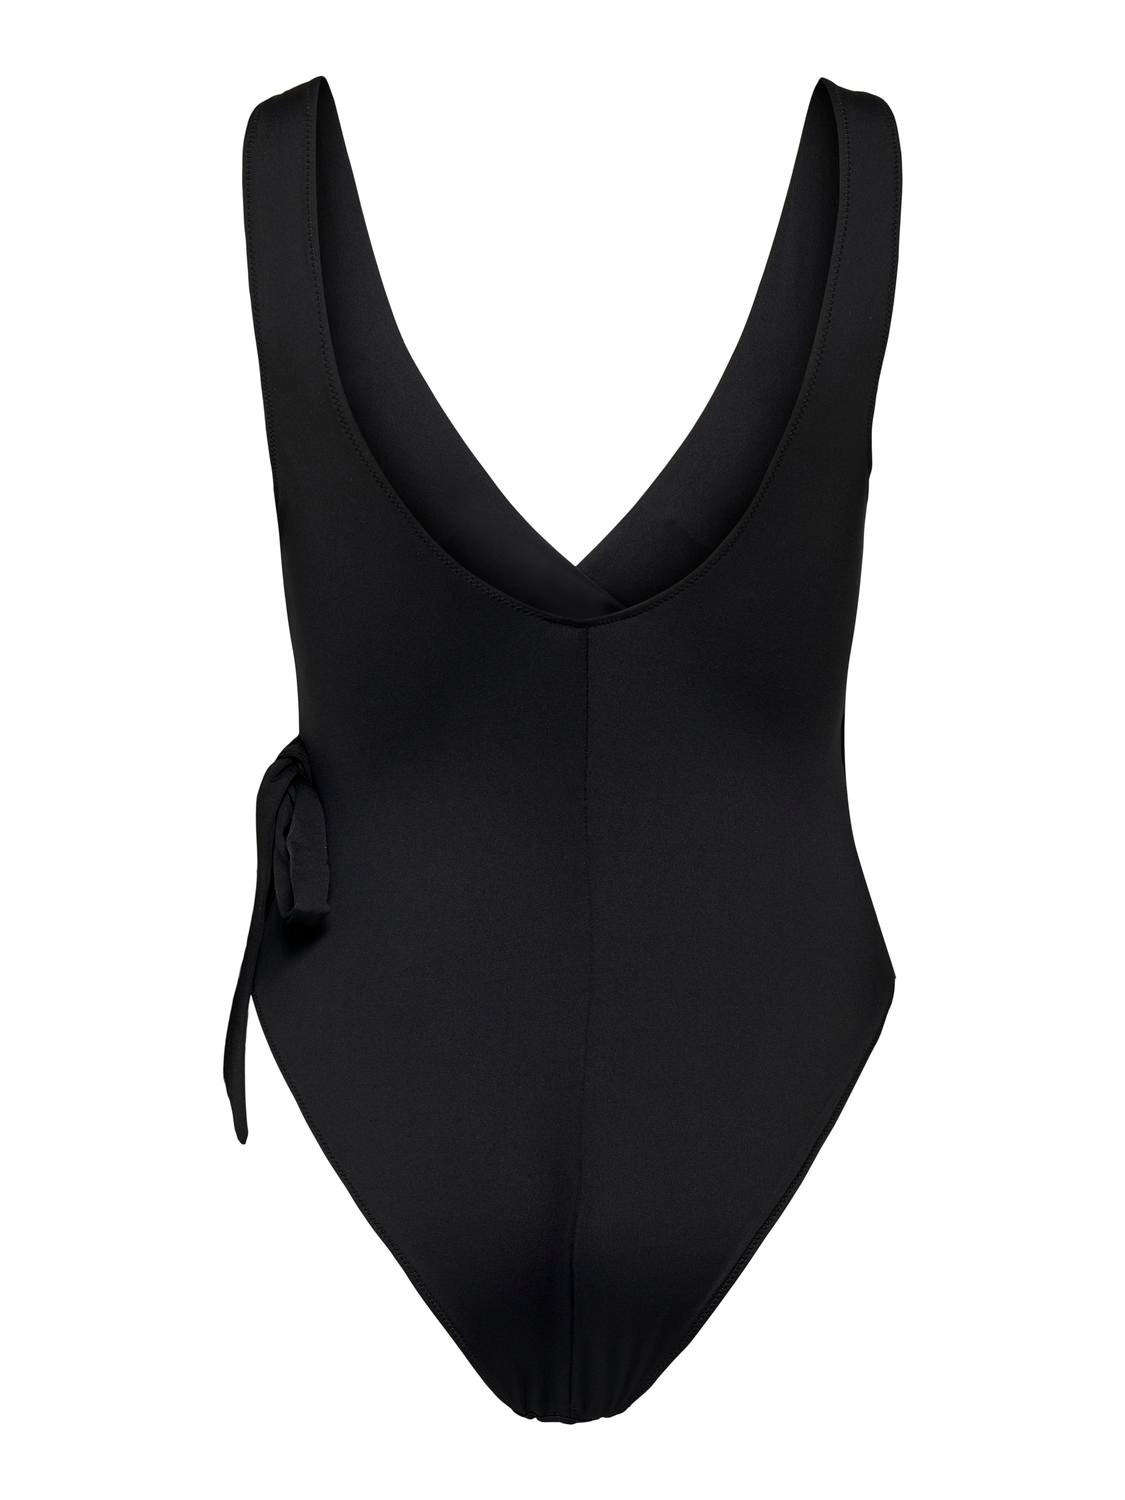 ONLY Swimsuit with side detail -Black - 15283188